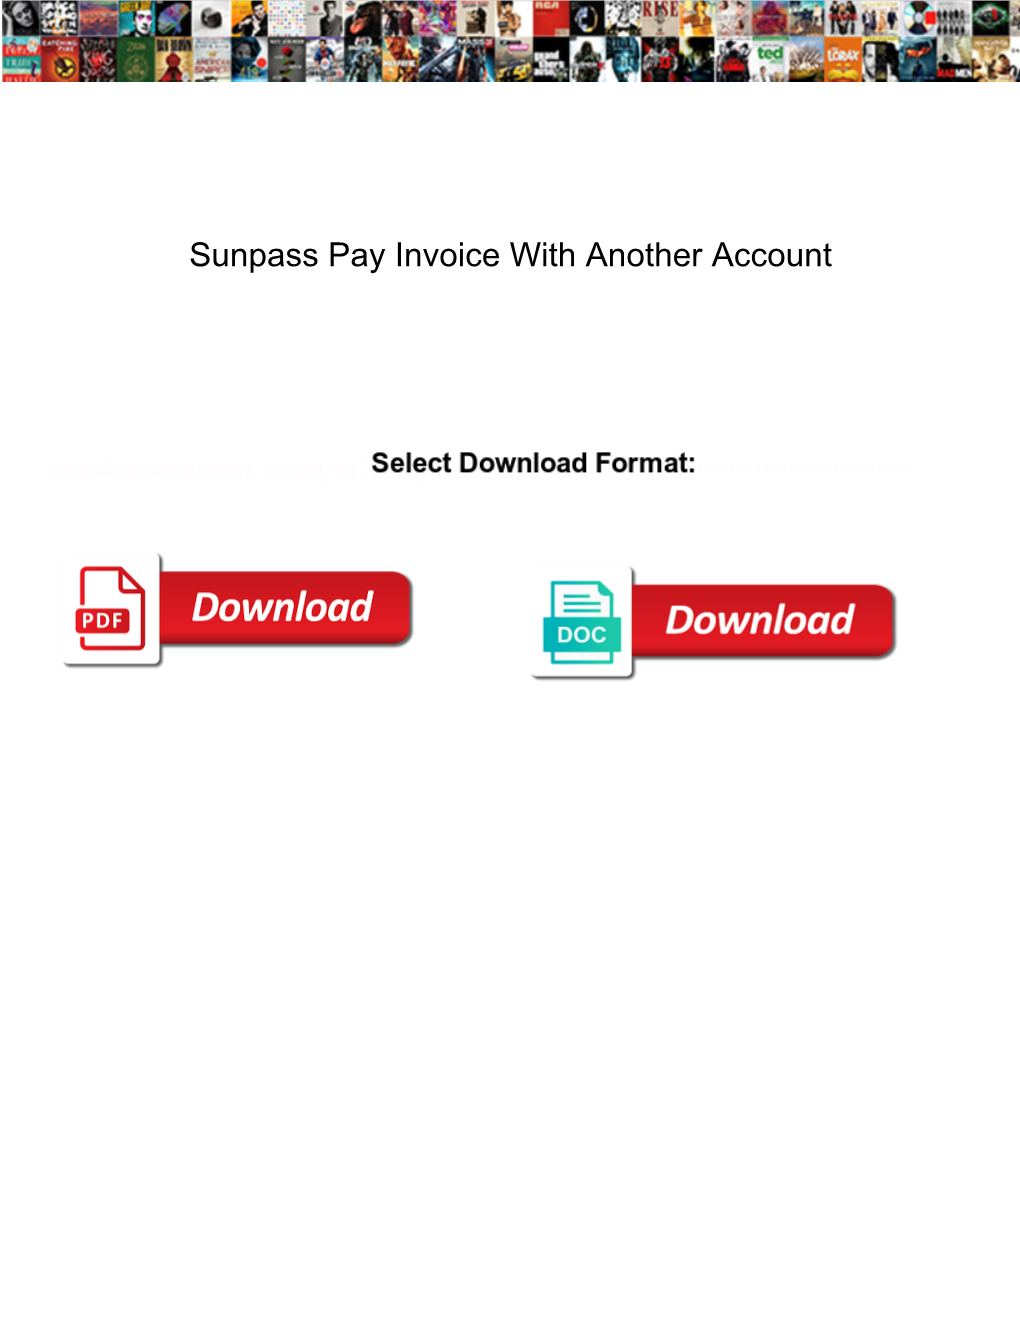 Sunpass Pay Invoice with Another Account